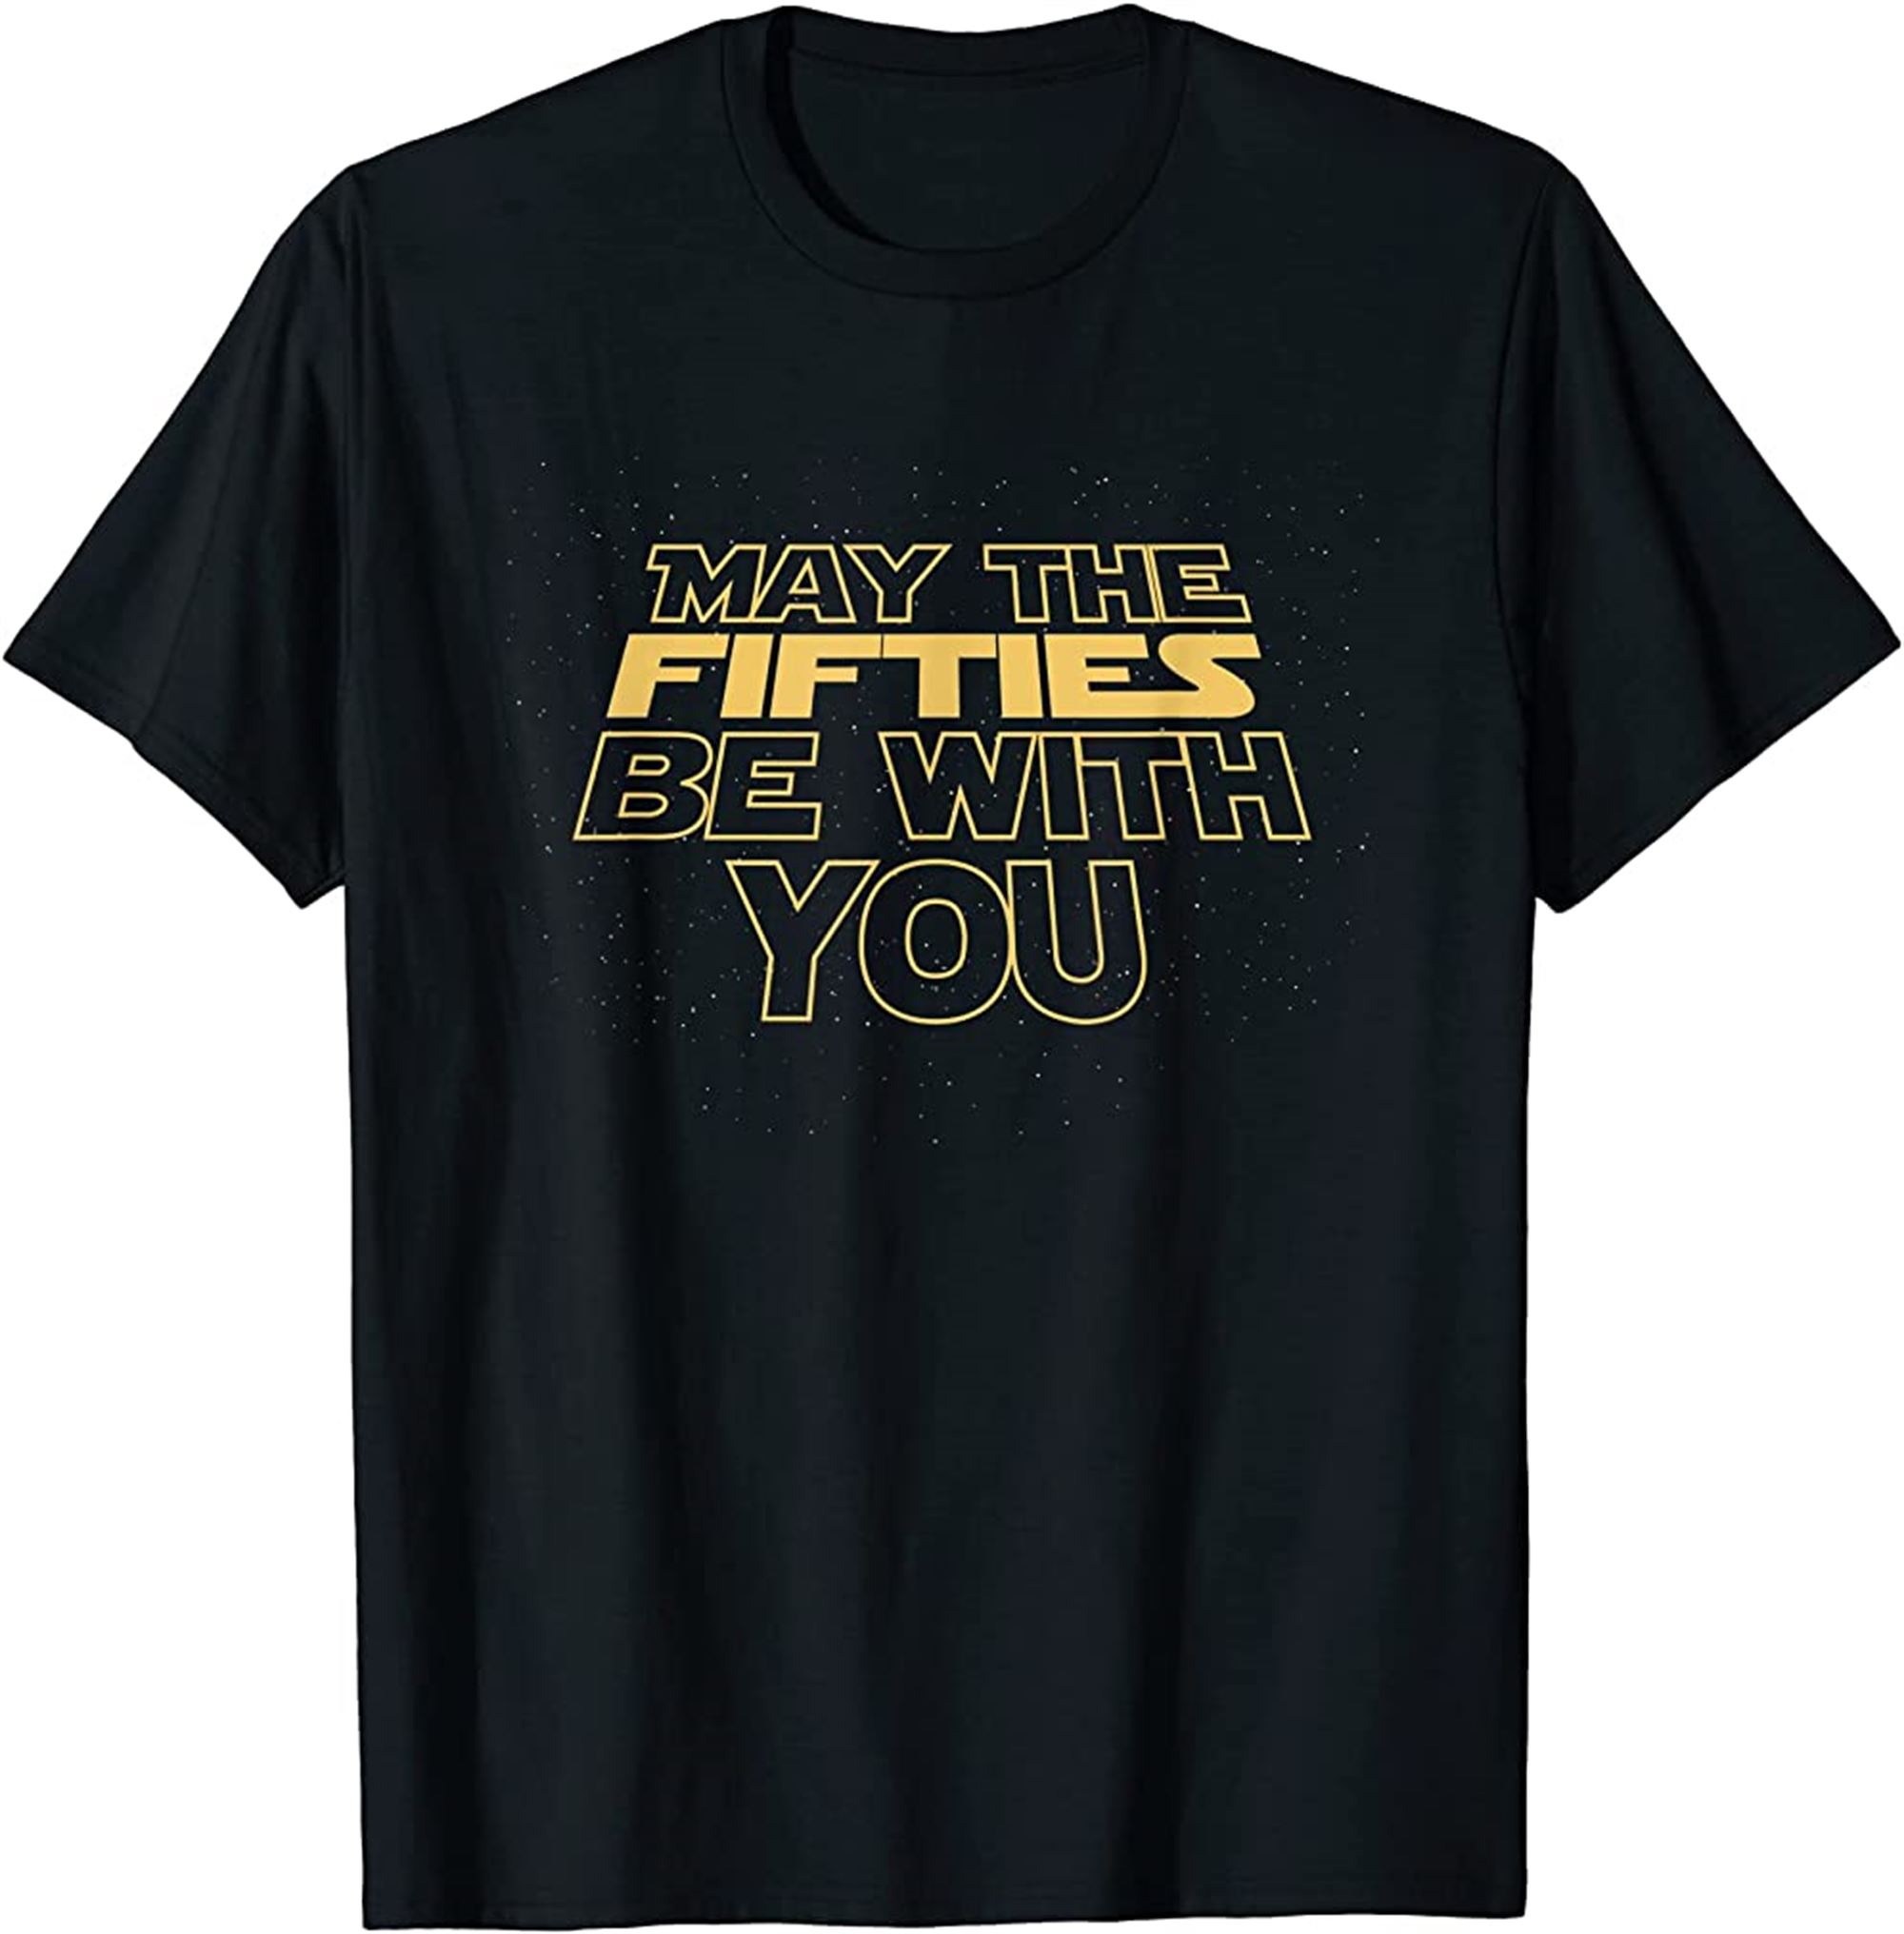 May The Fifties 50th Be With You Vintage 50th Birthday T-shirt Full Size Up To 5xl